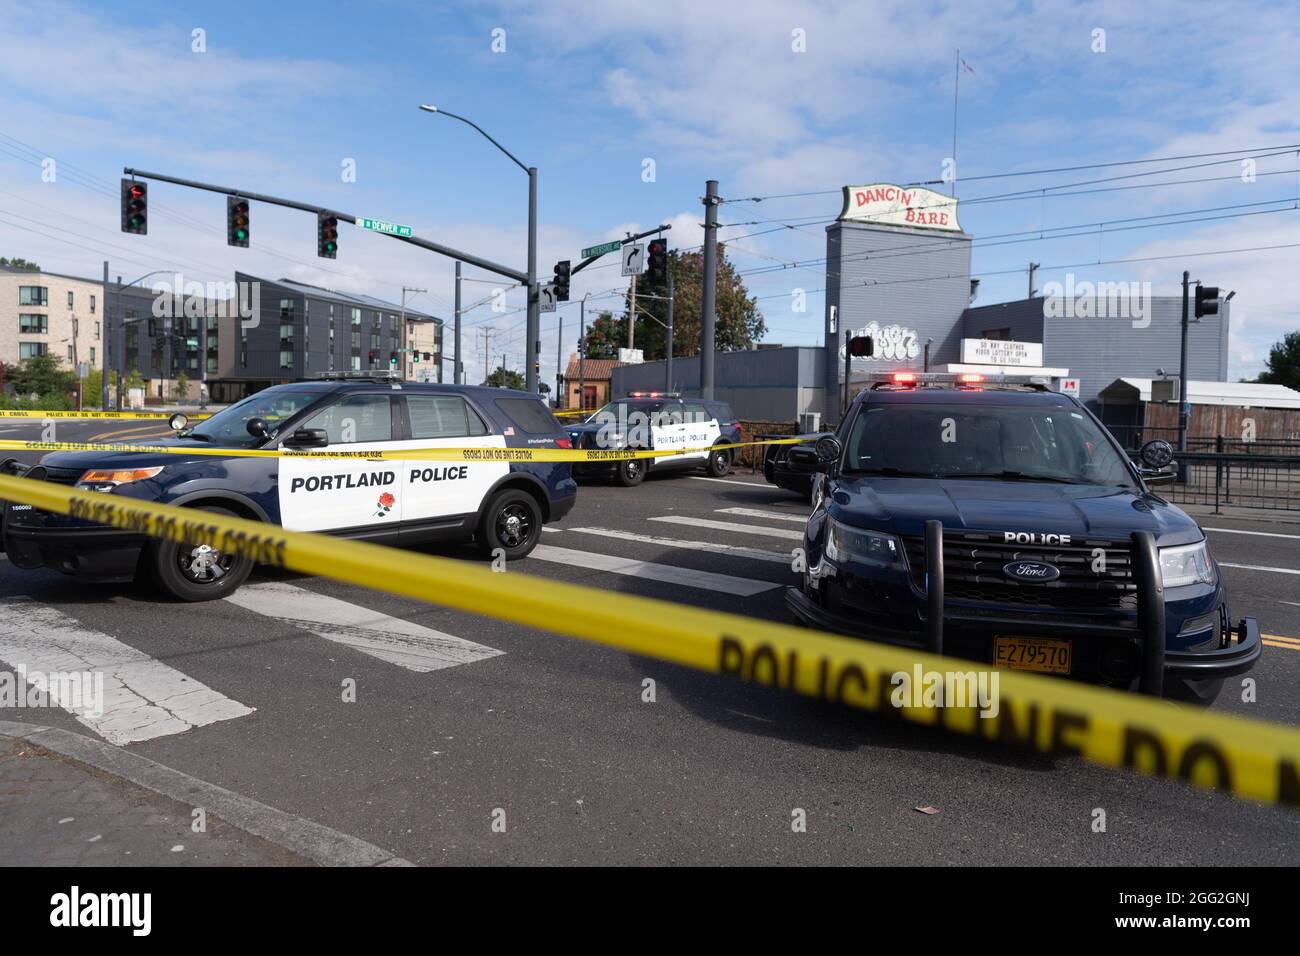 Portland, USA. 27th Aug, 2021. Police cruisers block an intersection after a deadly shootout that left one officer wounded in Portland, Oregon. Earlier in the day, the DEA served a warrant to a man in an apartment complex, soon after, Portland Police were called in for back-up and a shootout ensued, leaving one Portland Police Officer wounded. The suspect was pronounced dead at the scene. Portland, Oregon, USA, August 27th, 2021 (Mathieu Lewis-Rolland/SIPA USA) Credit: Sipa USA/Alamy Live News Stock Photo